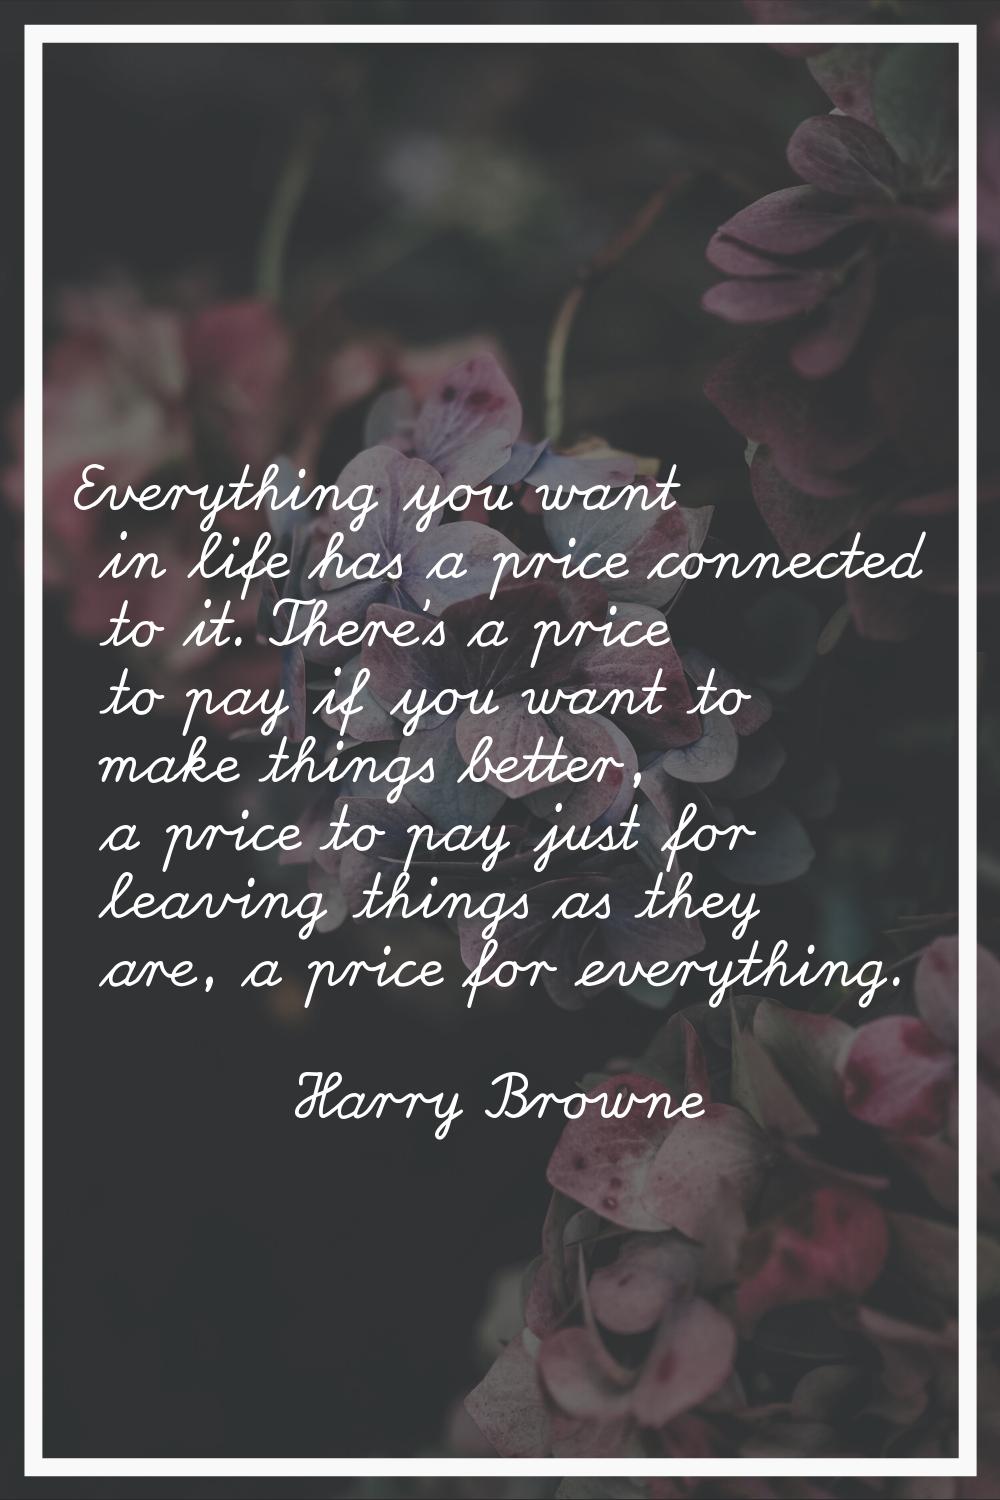 Everything you want in life has a price connected to it. There's a price to pay if you want to make